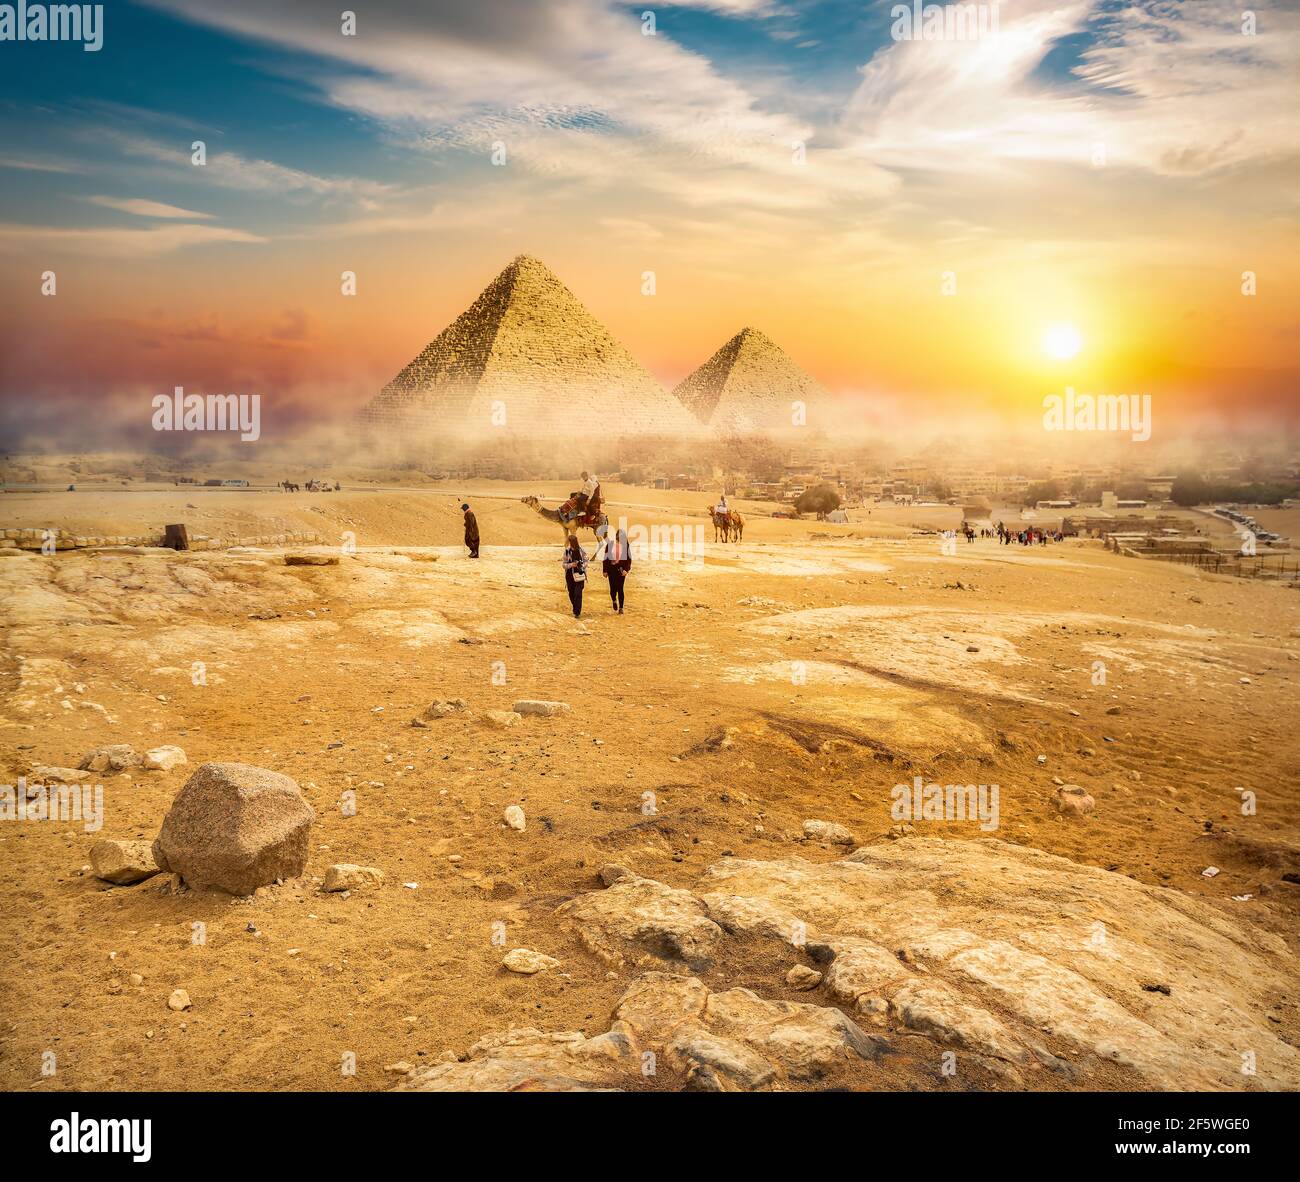 Egyptian pyramids in the desert at sunset Stock Photo